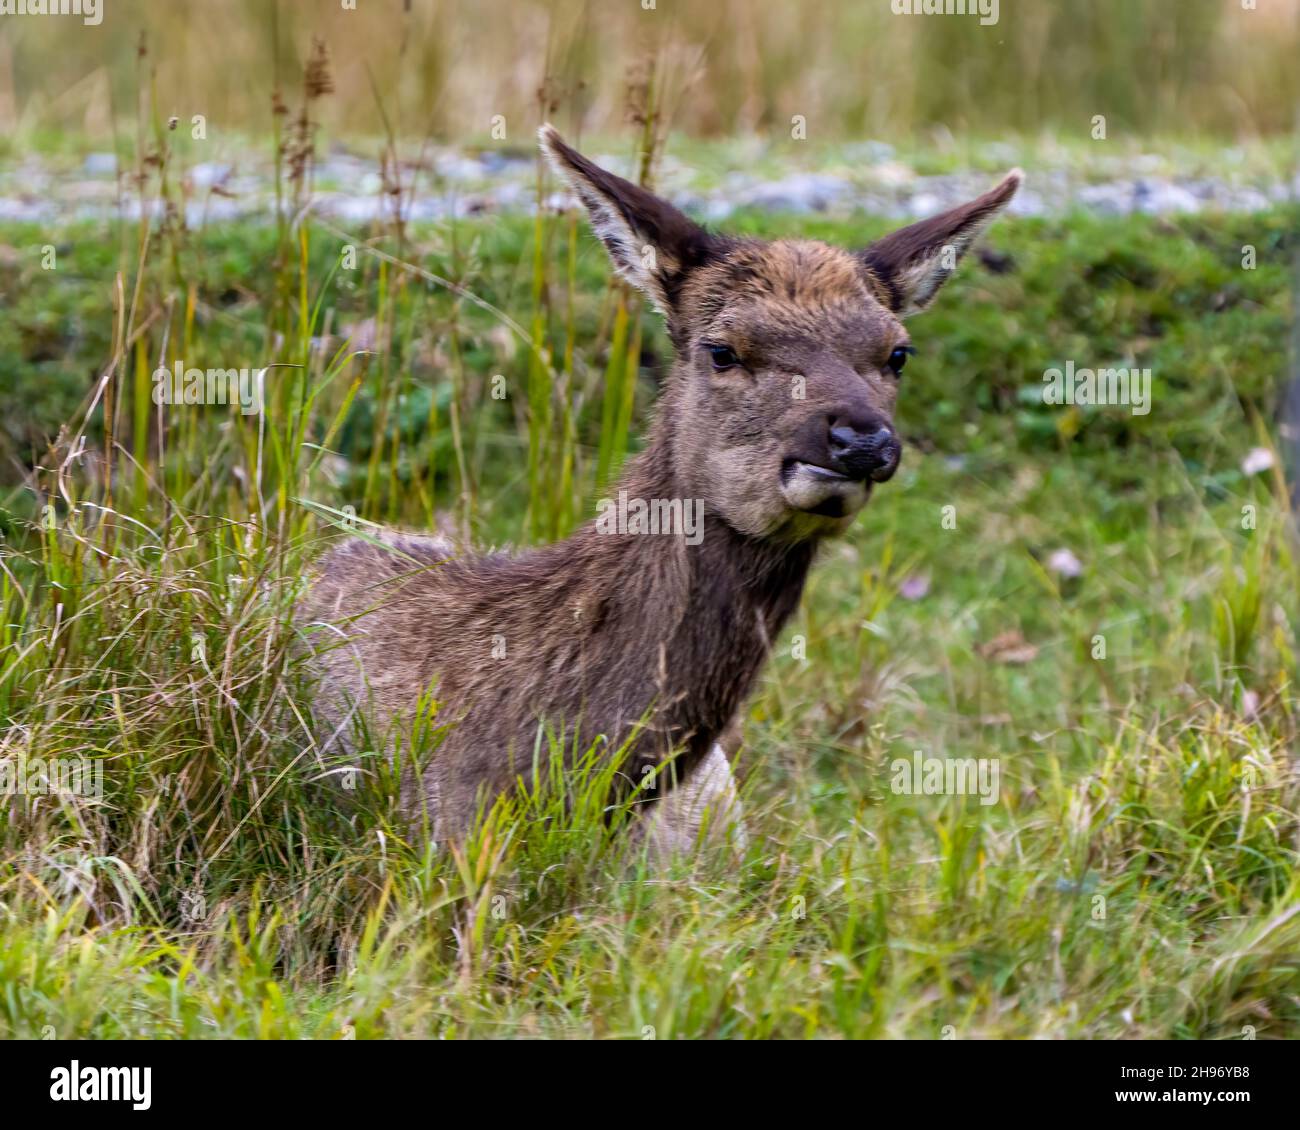 Young animal Elk resting in the field with grass background and foreground in its environment and habitat surrounding. Wapiti Portrait. Red Deer. Stock Photo